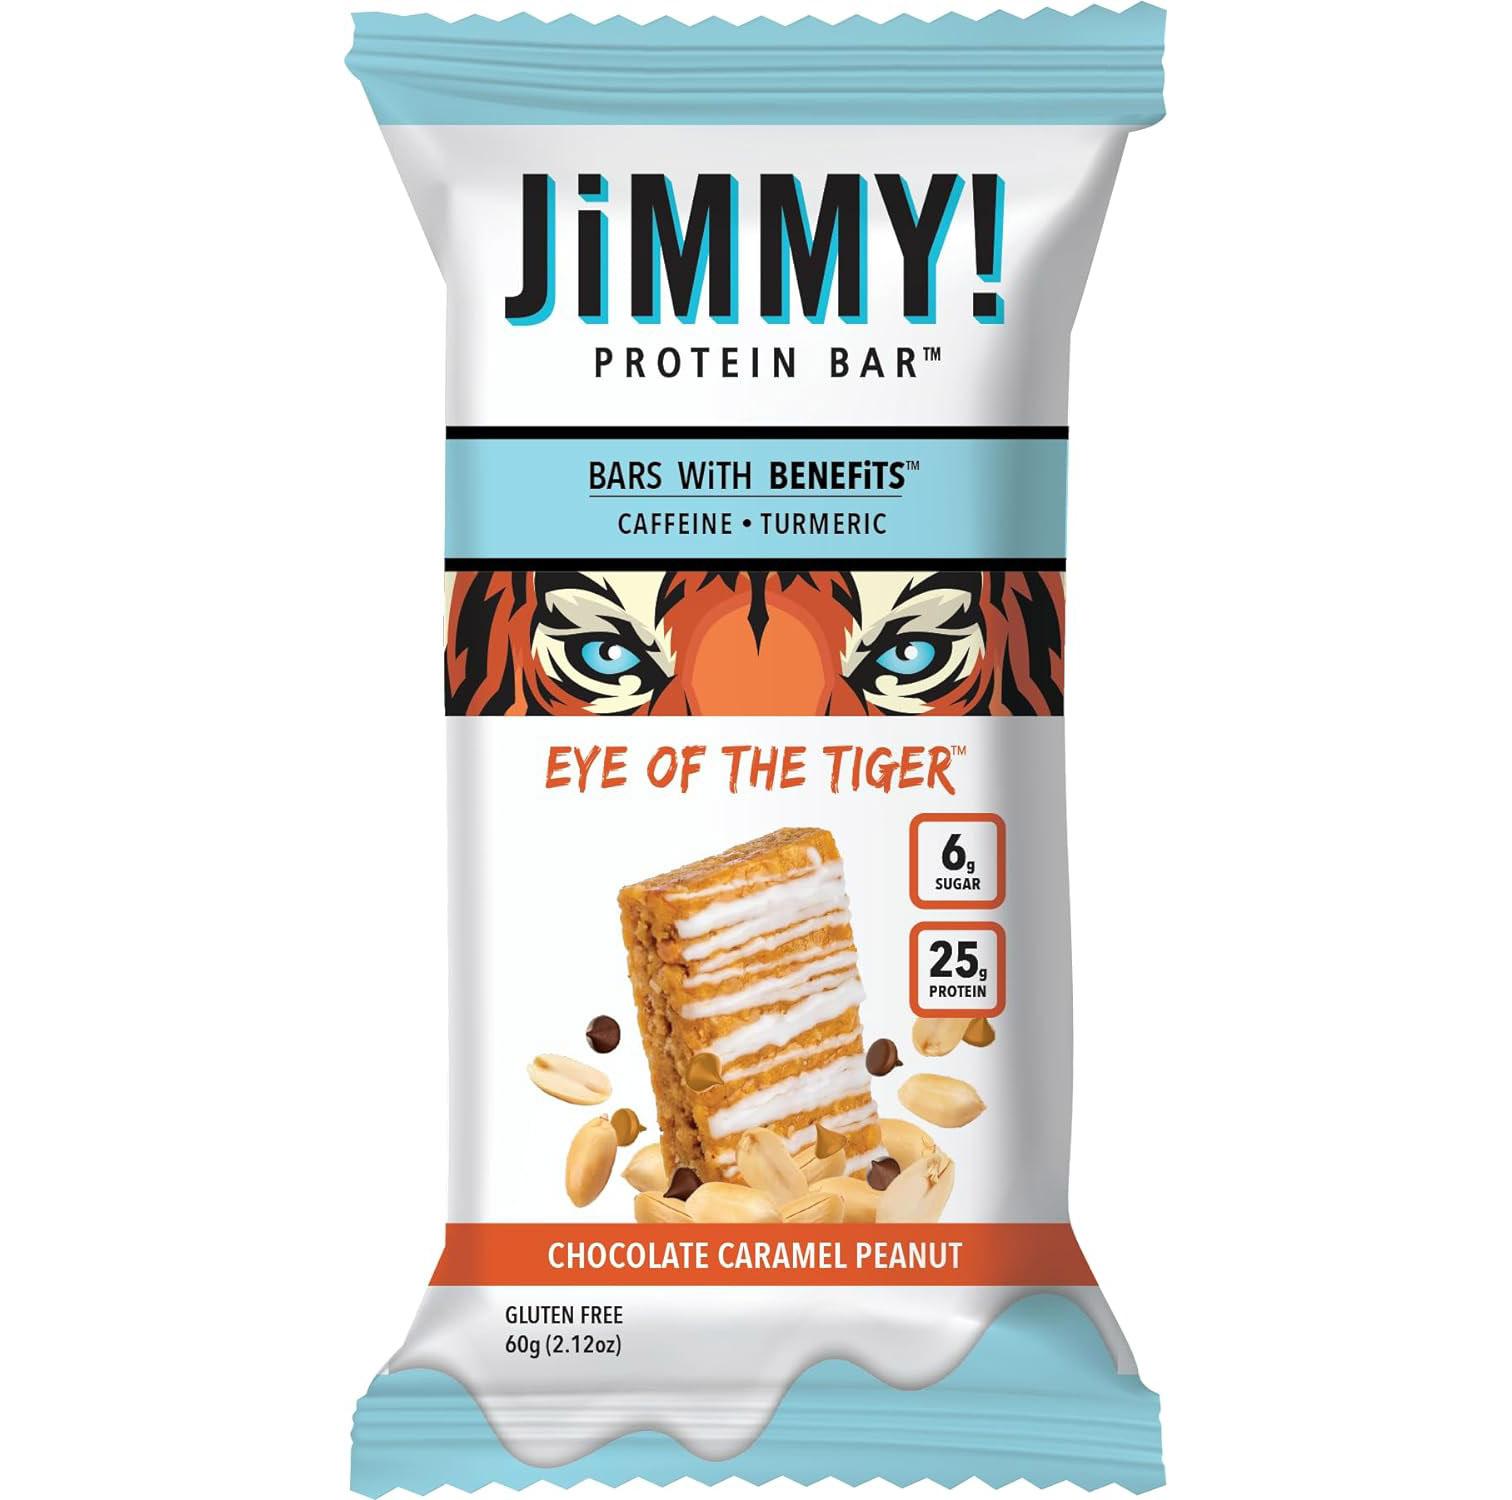 Jimmy Caramel Chocolate Nut 25g Protein Bar 12 Pack for $10.56